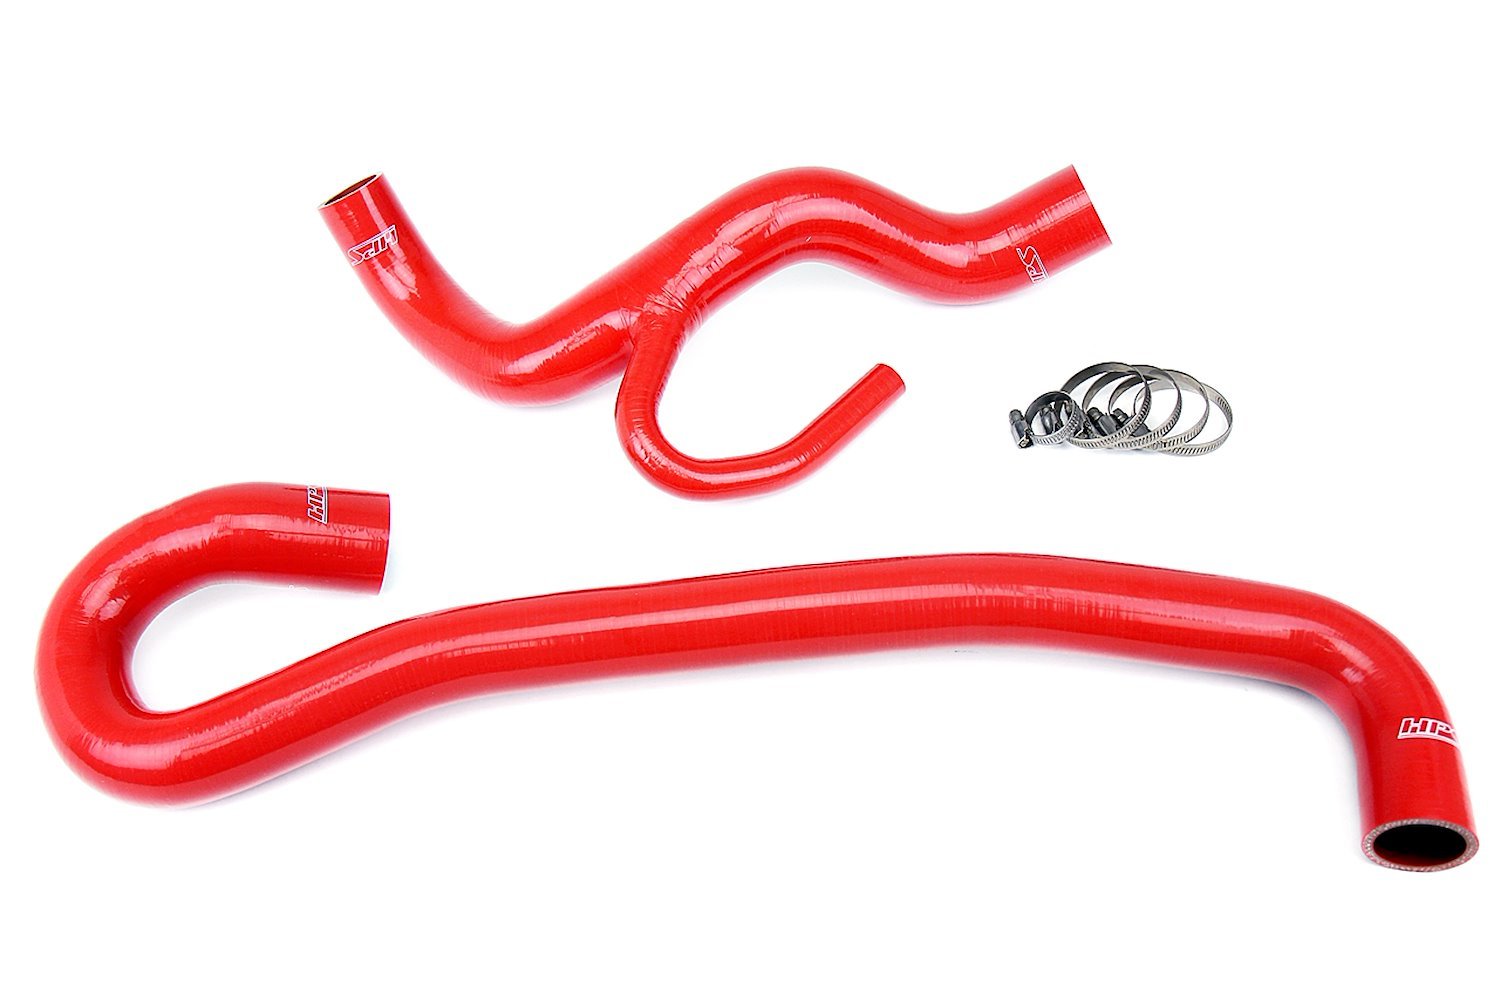 57-1456-RED Radiator Hose Kit, High-Temp 3-Ply Reinforced Silicone, Replace OEM Rubber Radiator Coolant Hoses